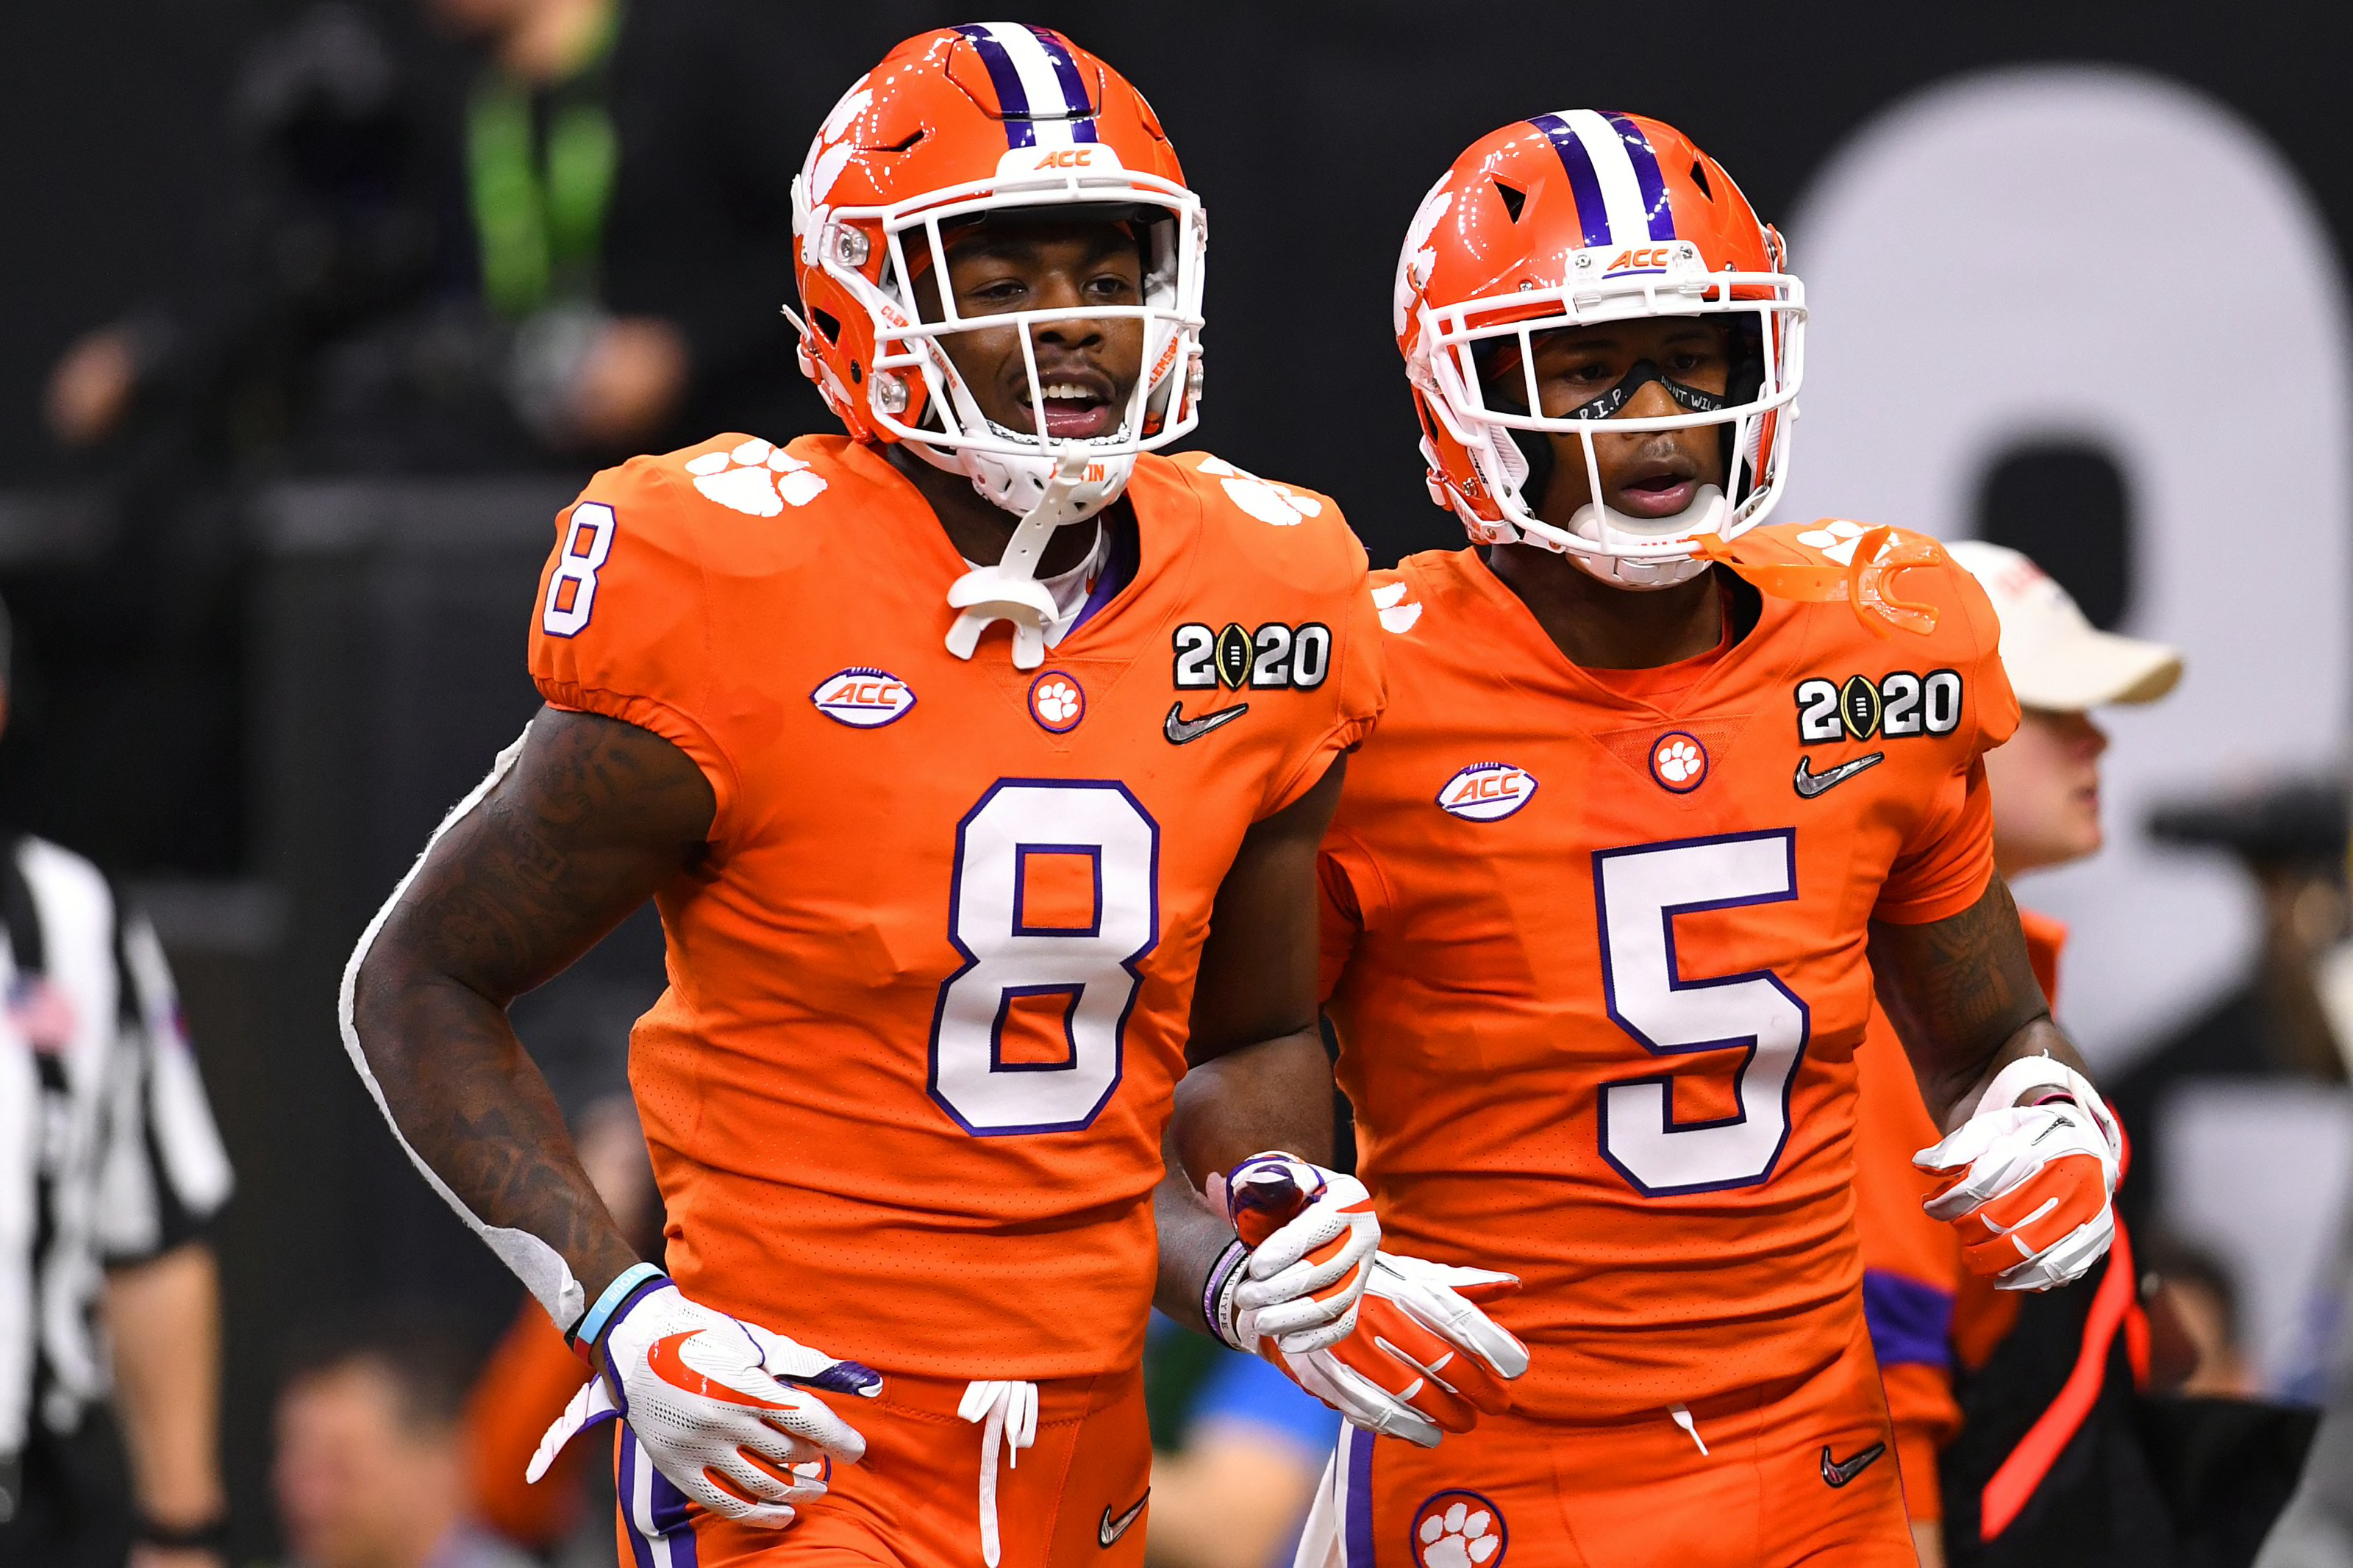 Clemson Football 3 biggest questions facing Tigers for 2020 season